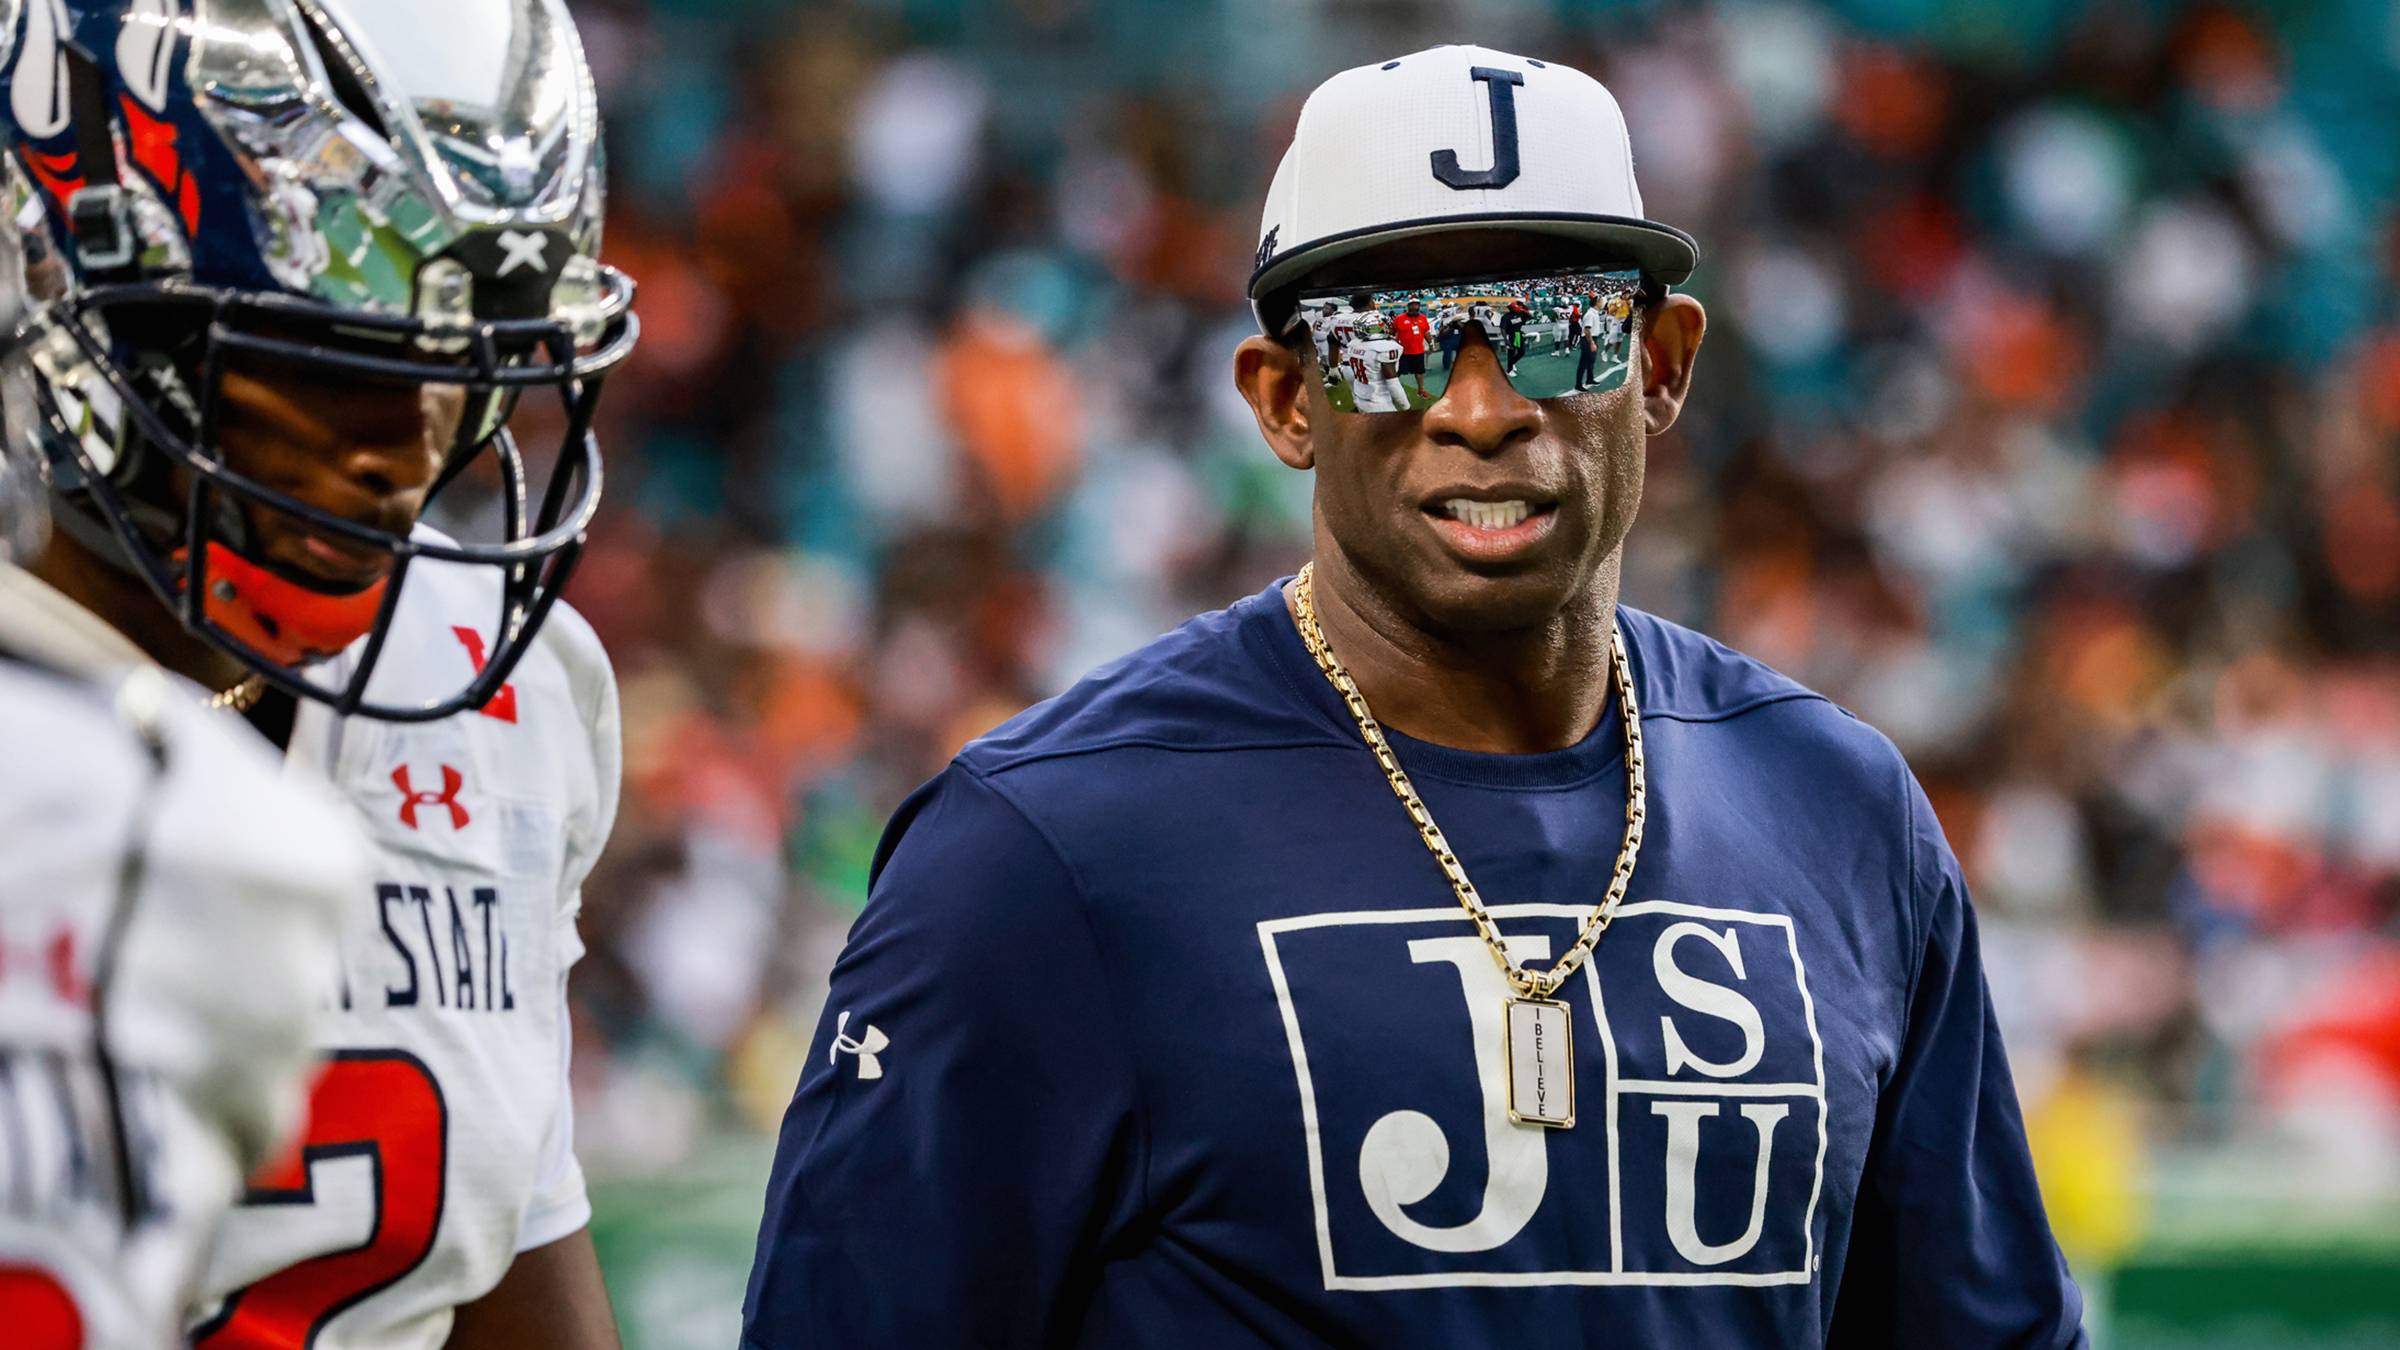 Deion Sanders Responded To Eddie Robinson Jr.'s Claims Of Not Being SWAC, News